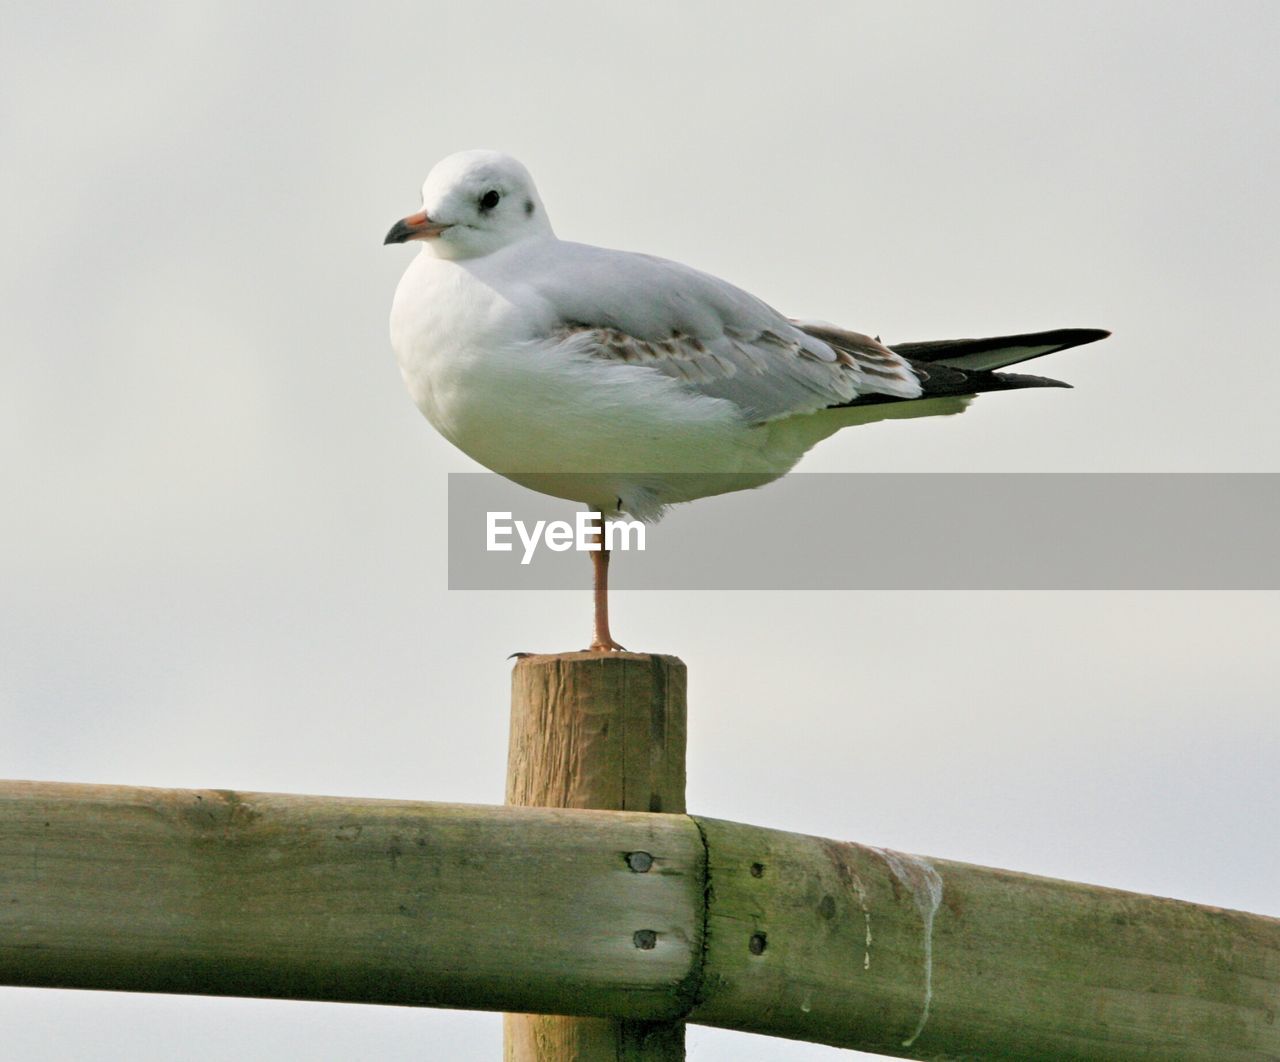 Seagull perching on wooden railing against clear sky